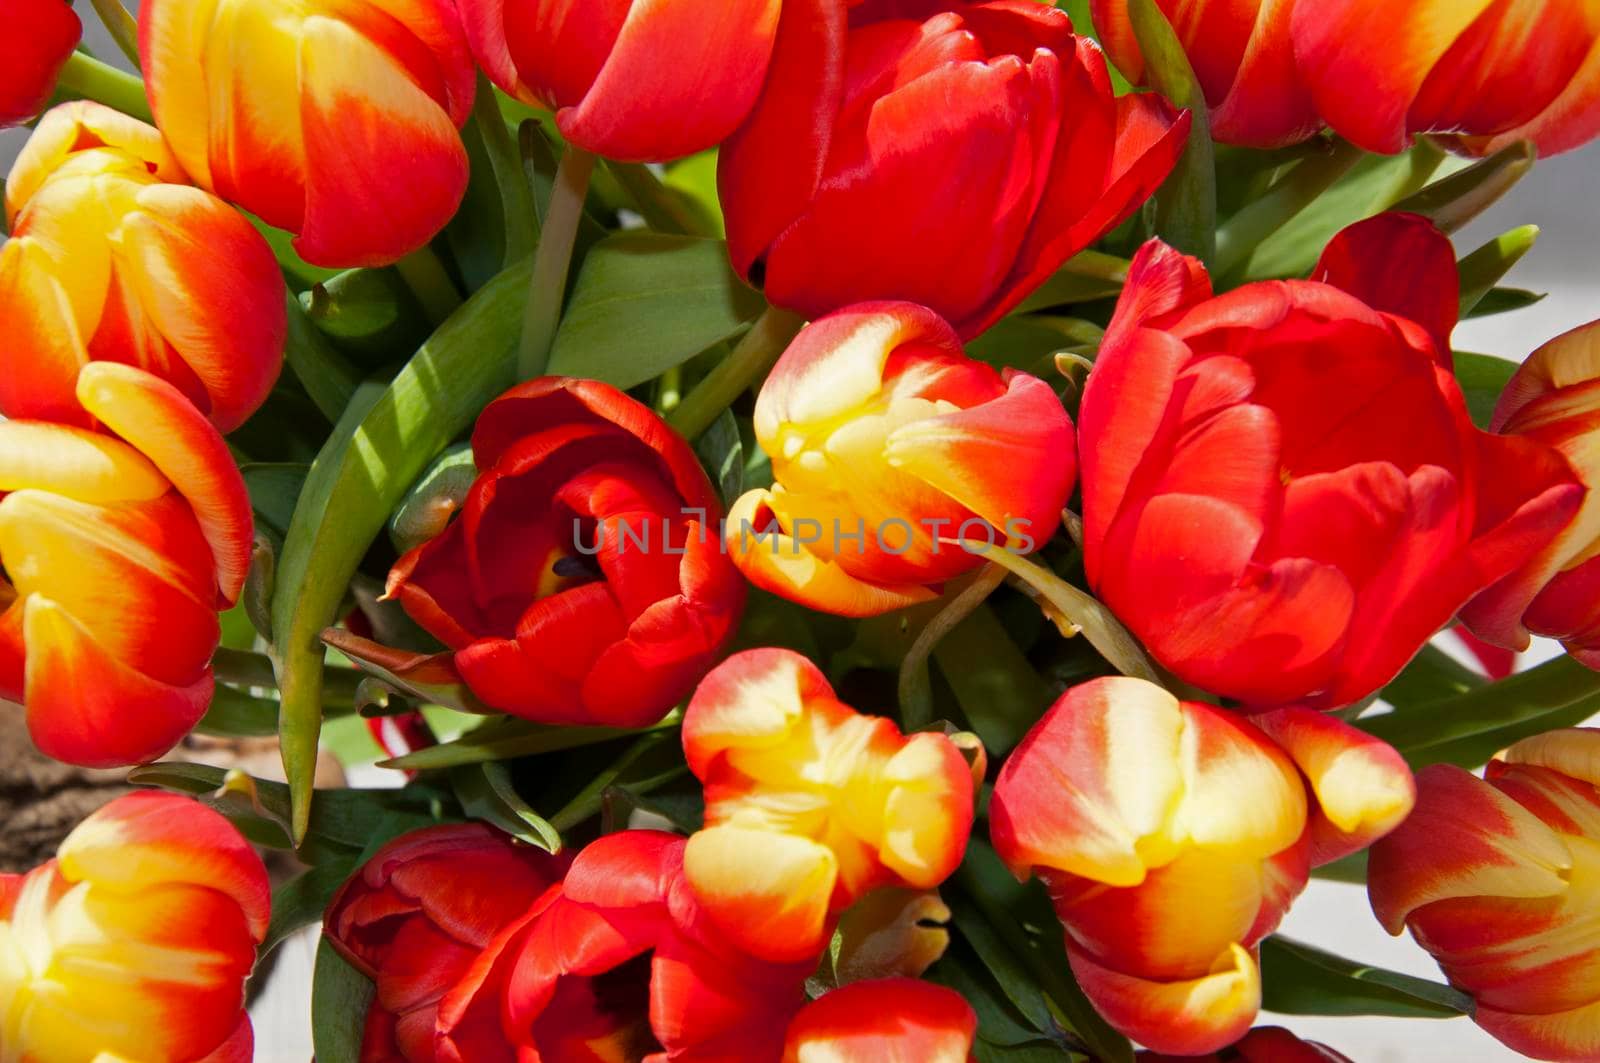 Big bouquet of red and yellow tulips with green leaves, macro